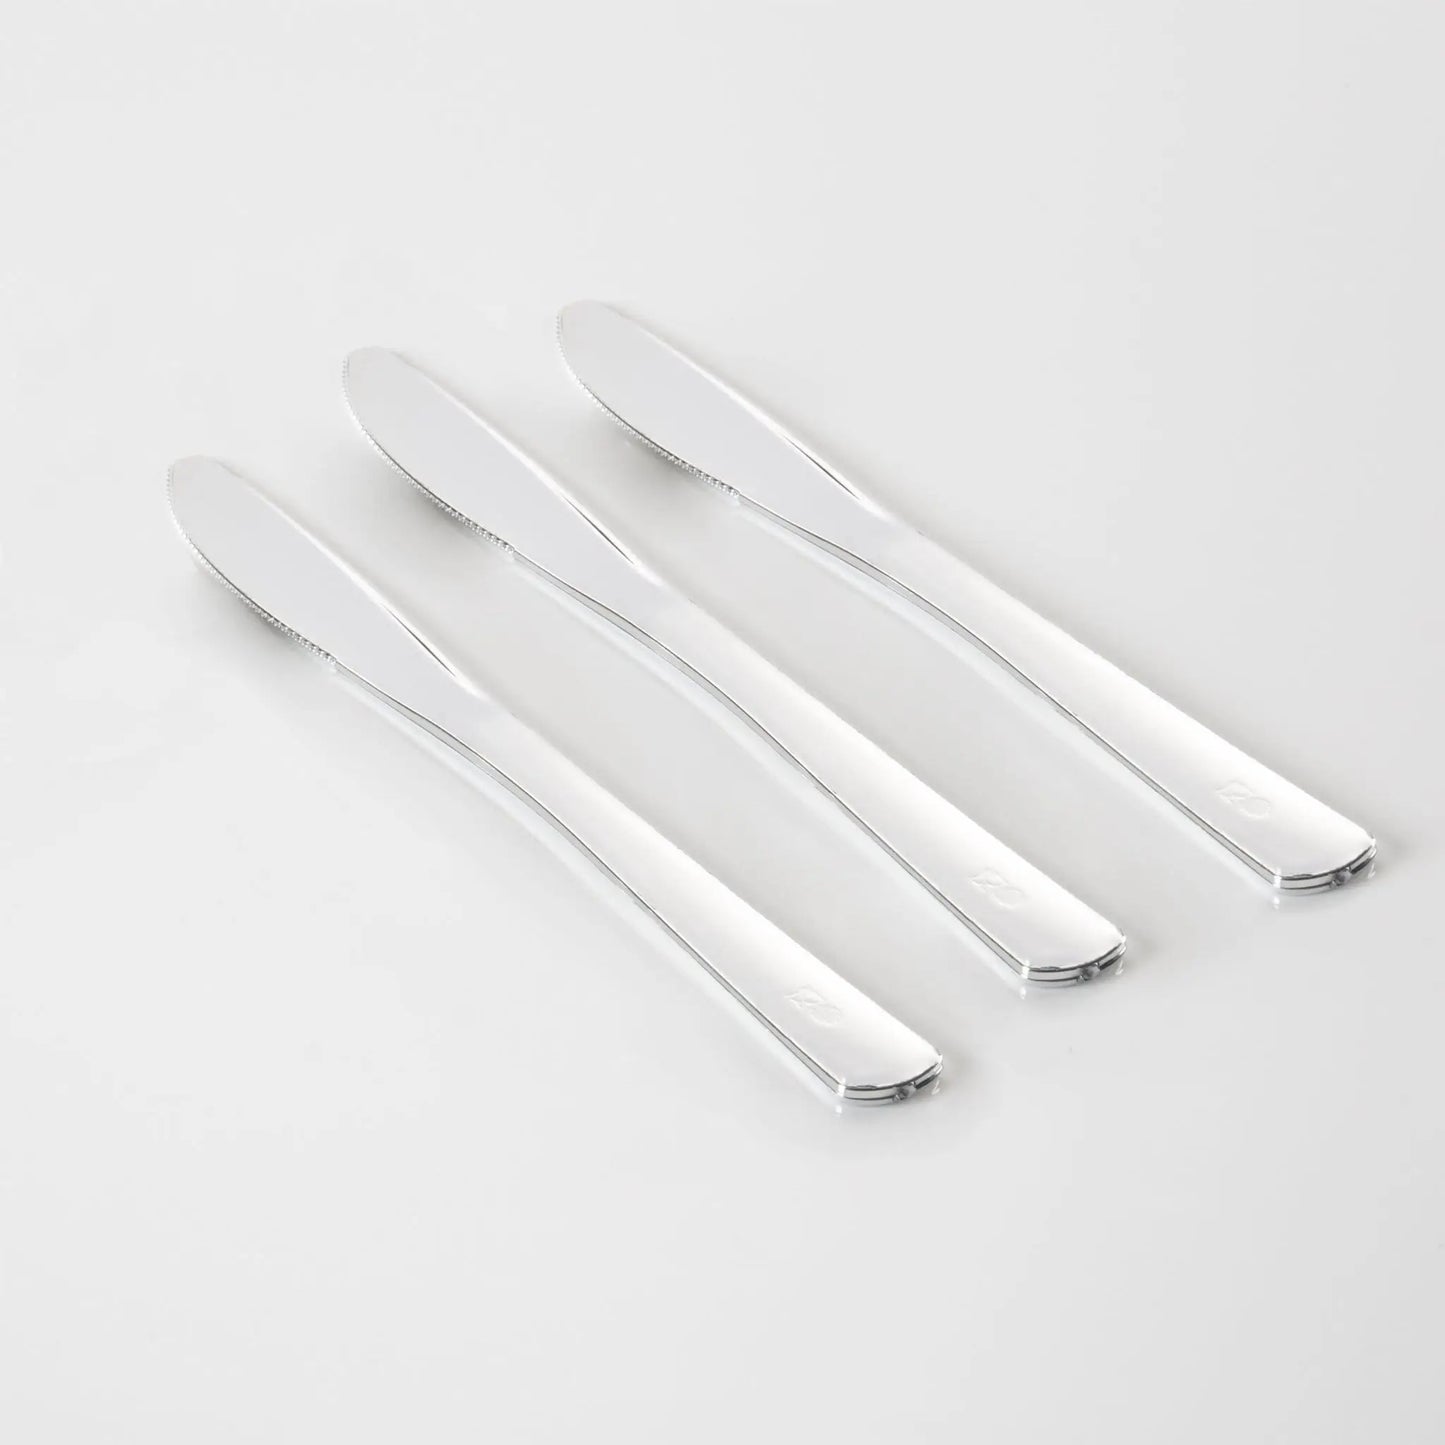 CLASSIC SILVER KNIVES | 20 PIECES